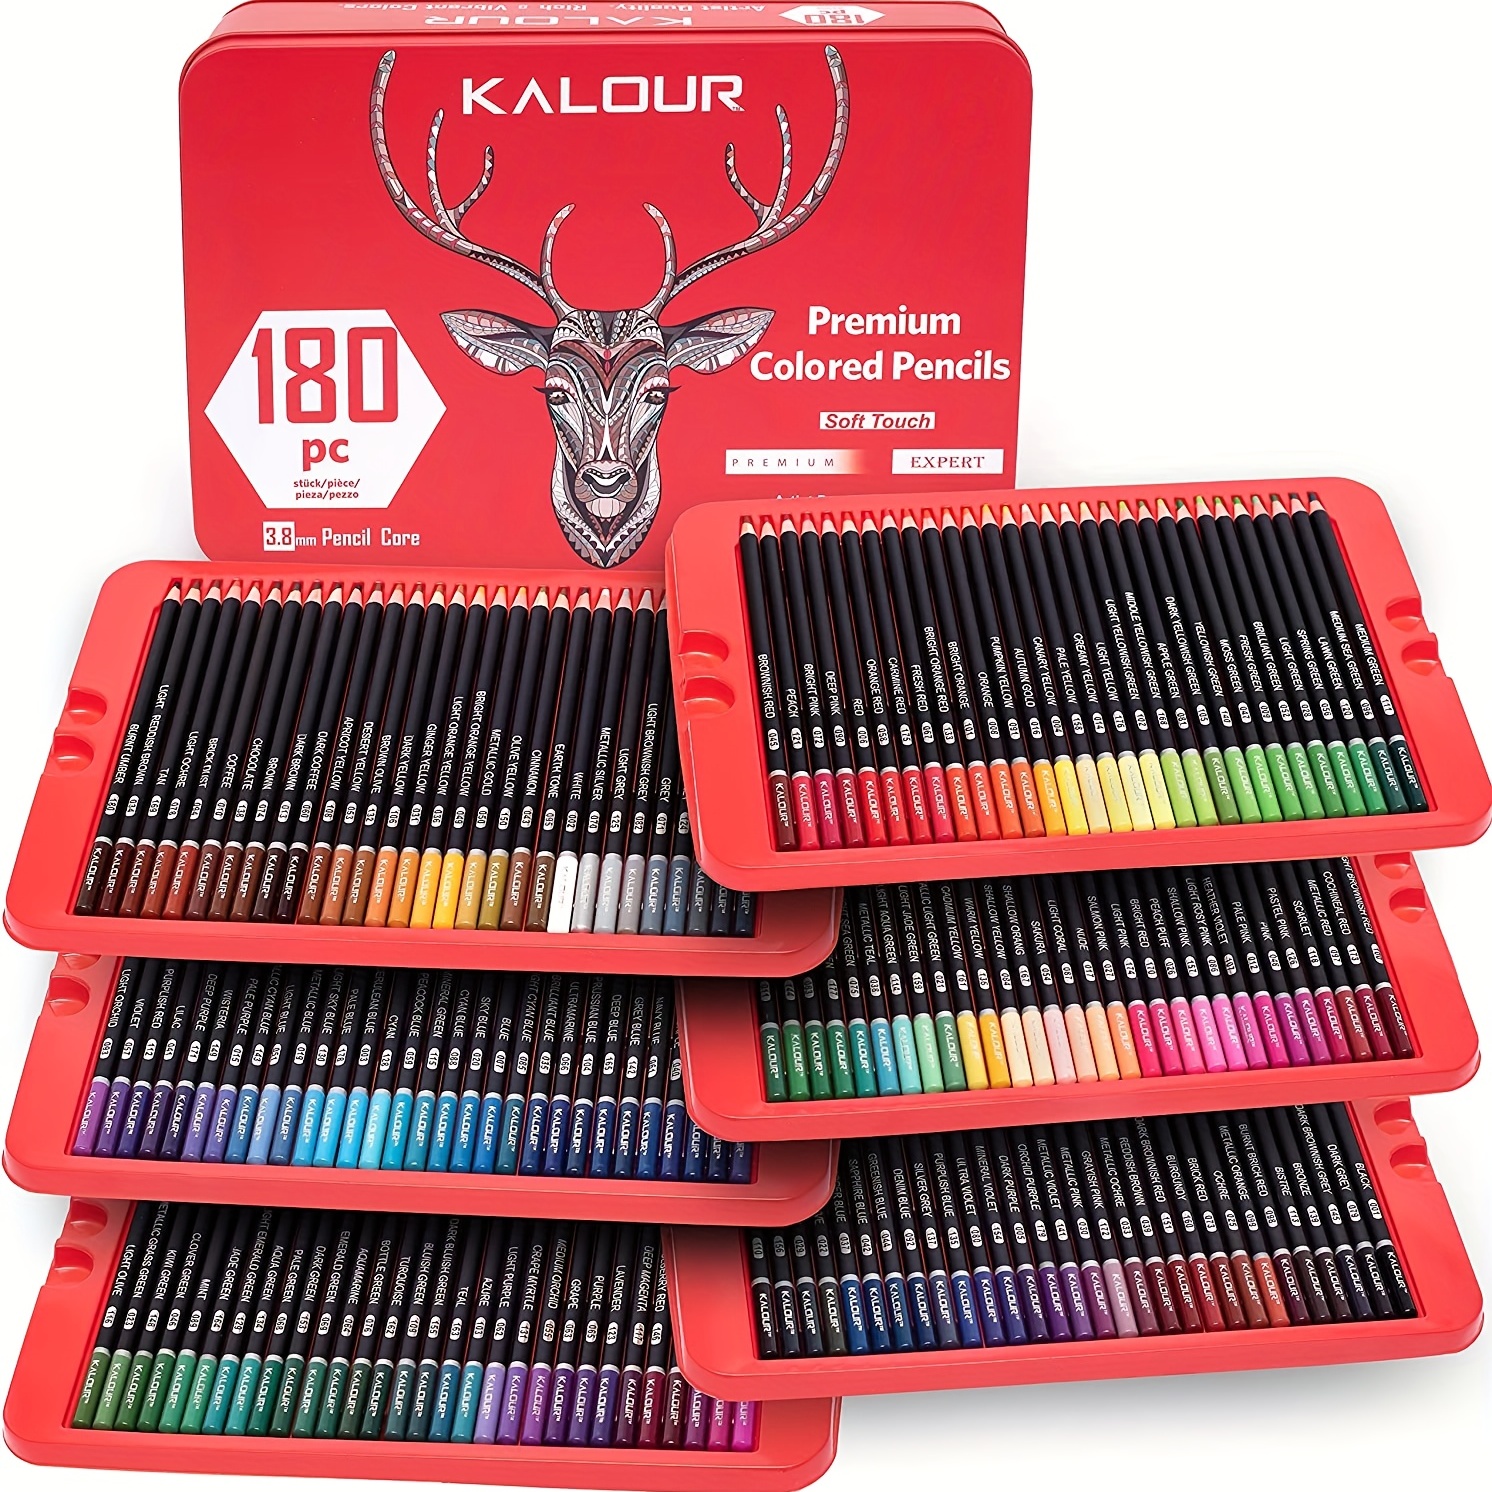 KALOUR Premium Colored Pencils,Set of 120 Colors,Artists Soft Core with  Vibrant Color,Ideal for Drawing Sketching Shading,Coloring Pencils for  Adults Beginners kids